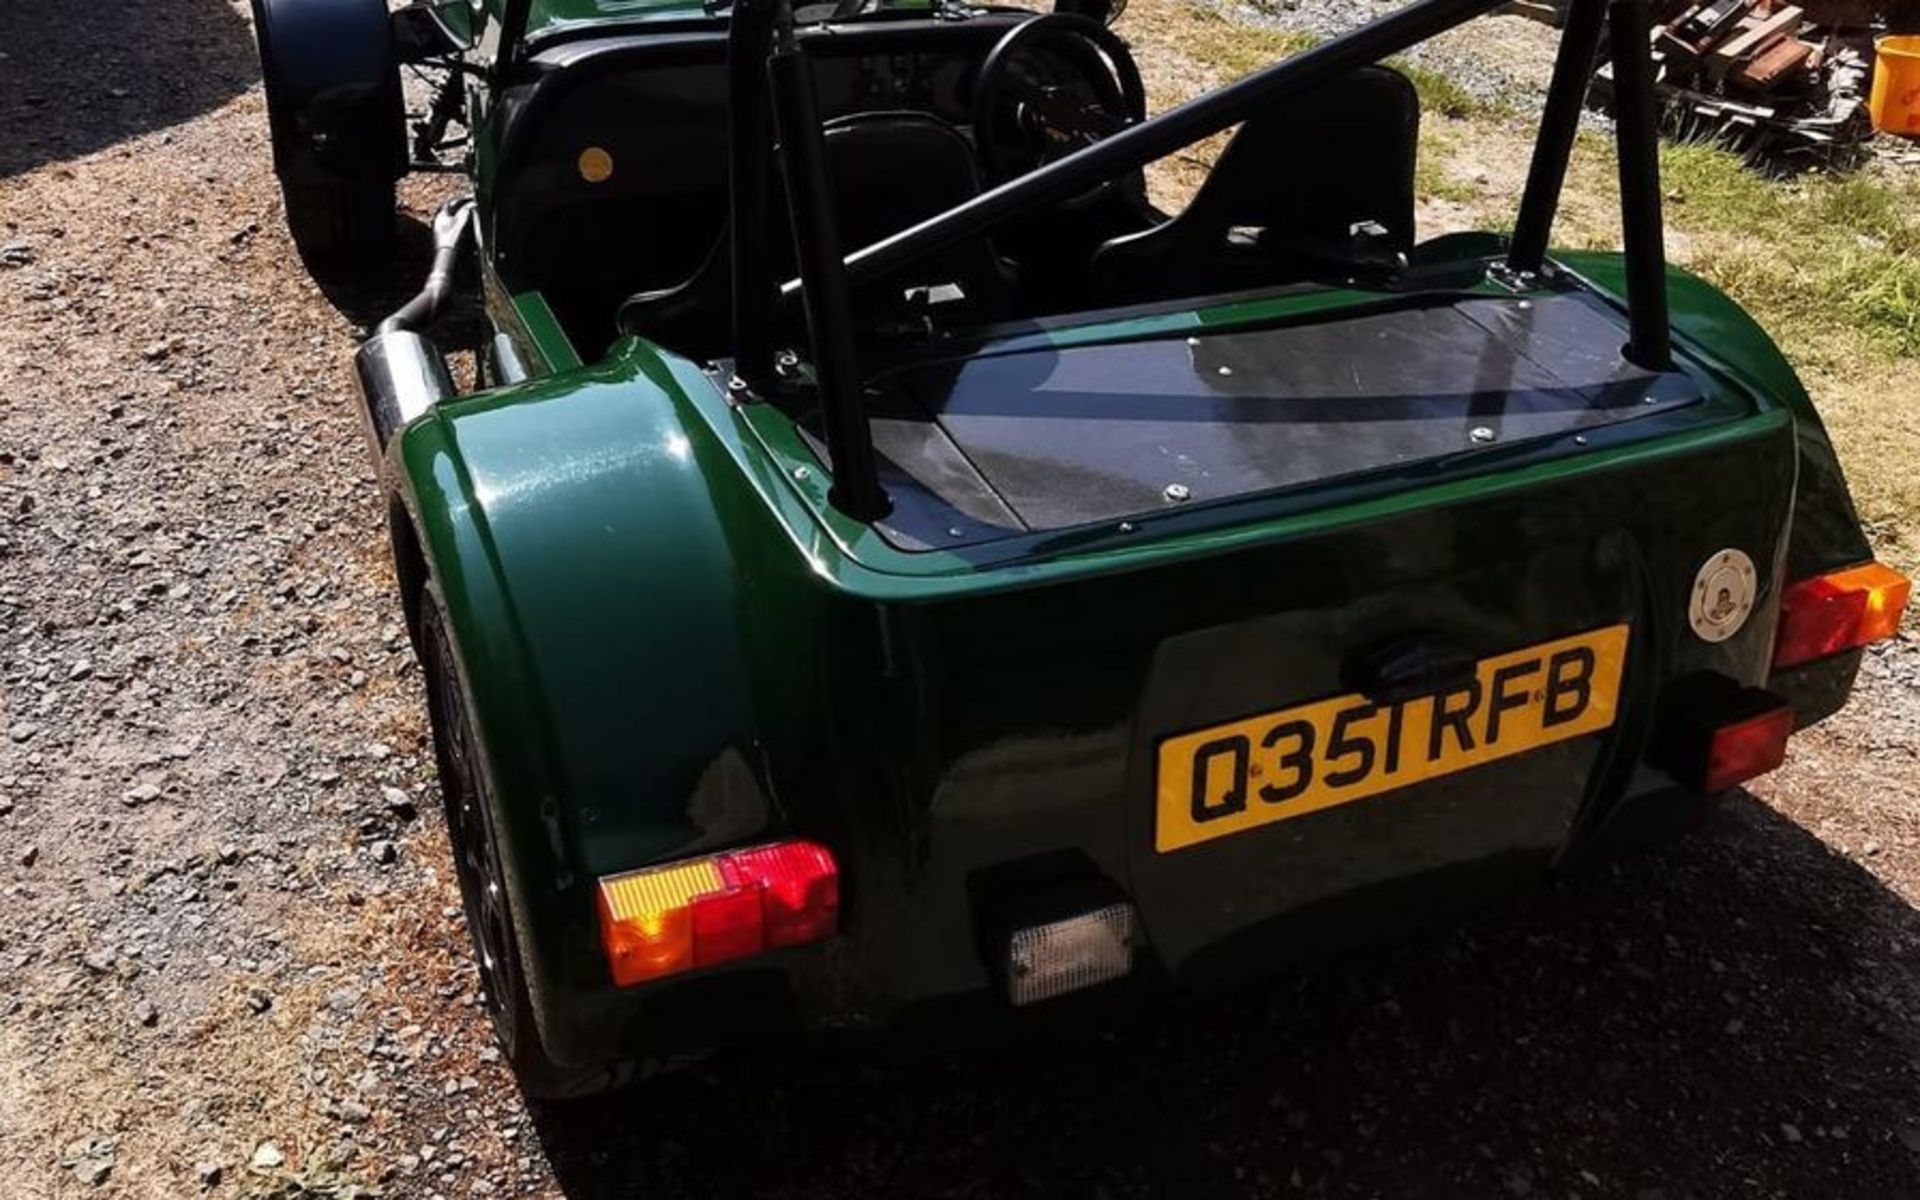 1998 Westfield Sei Registration number Q351 RFB British racing green over carbon graphic Built - Image 8 of 14